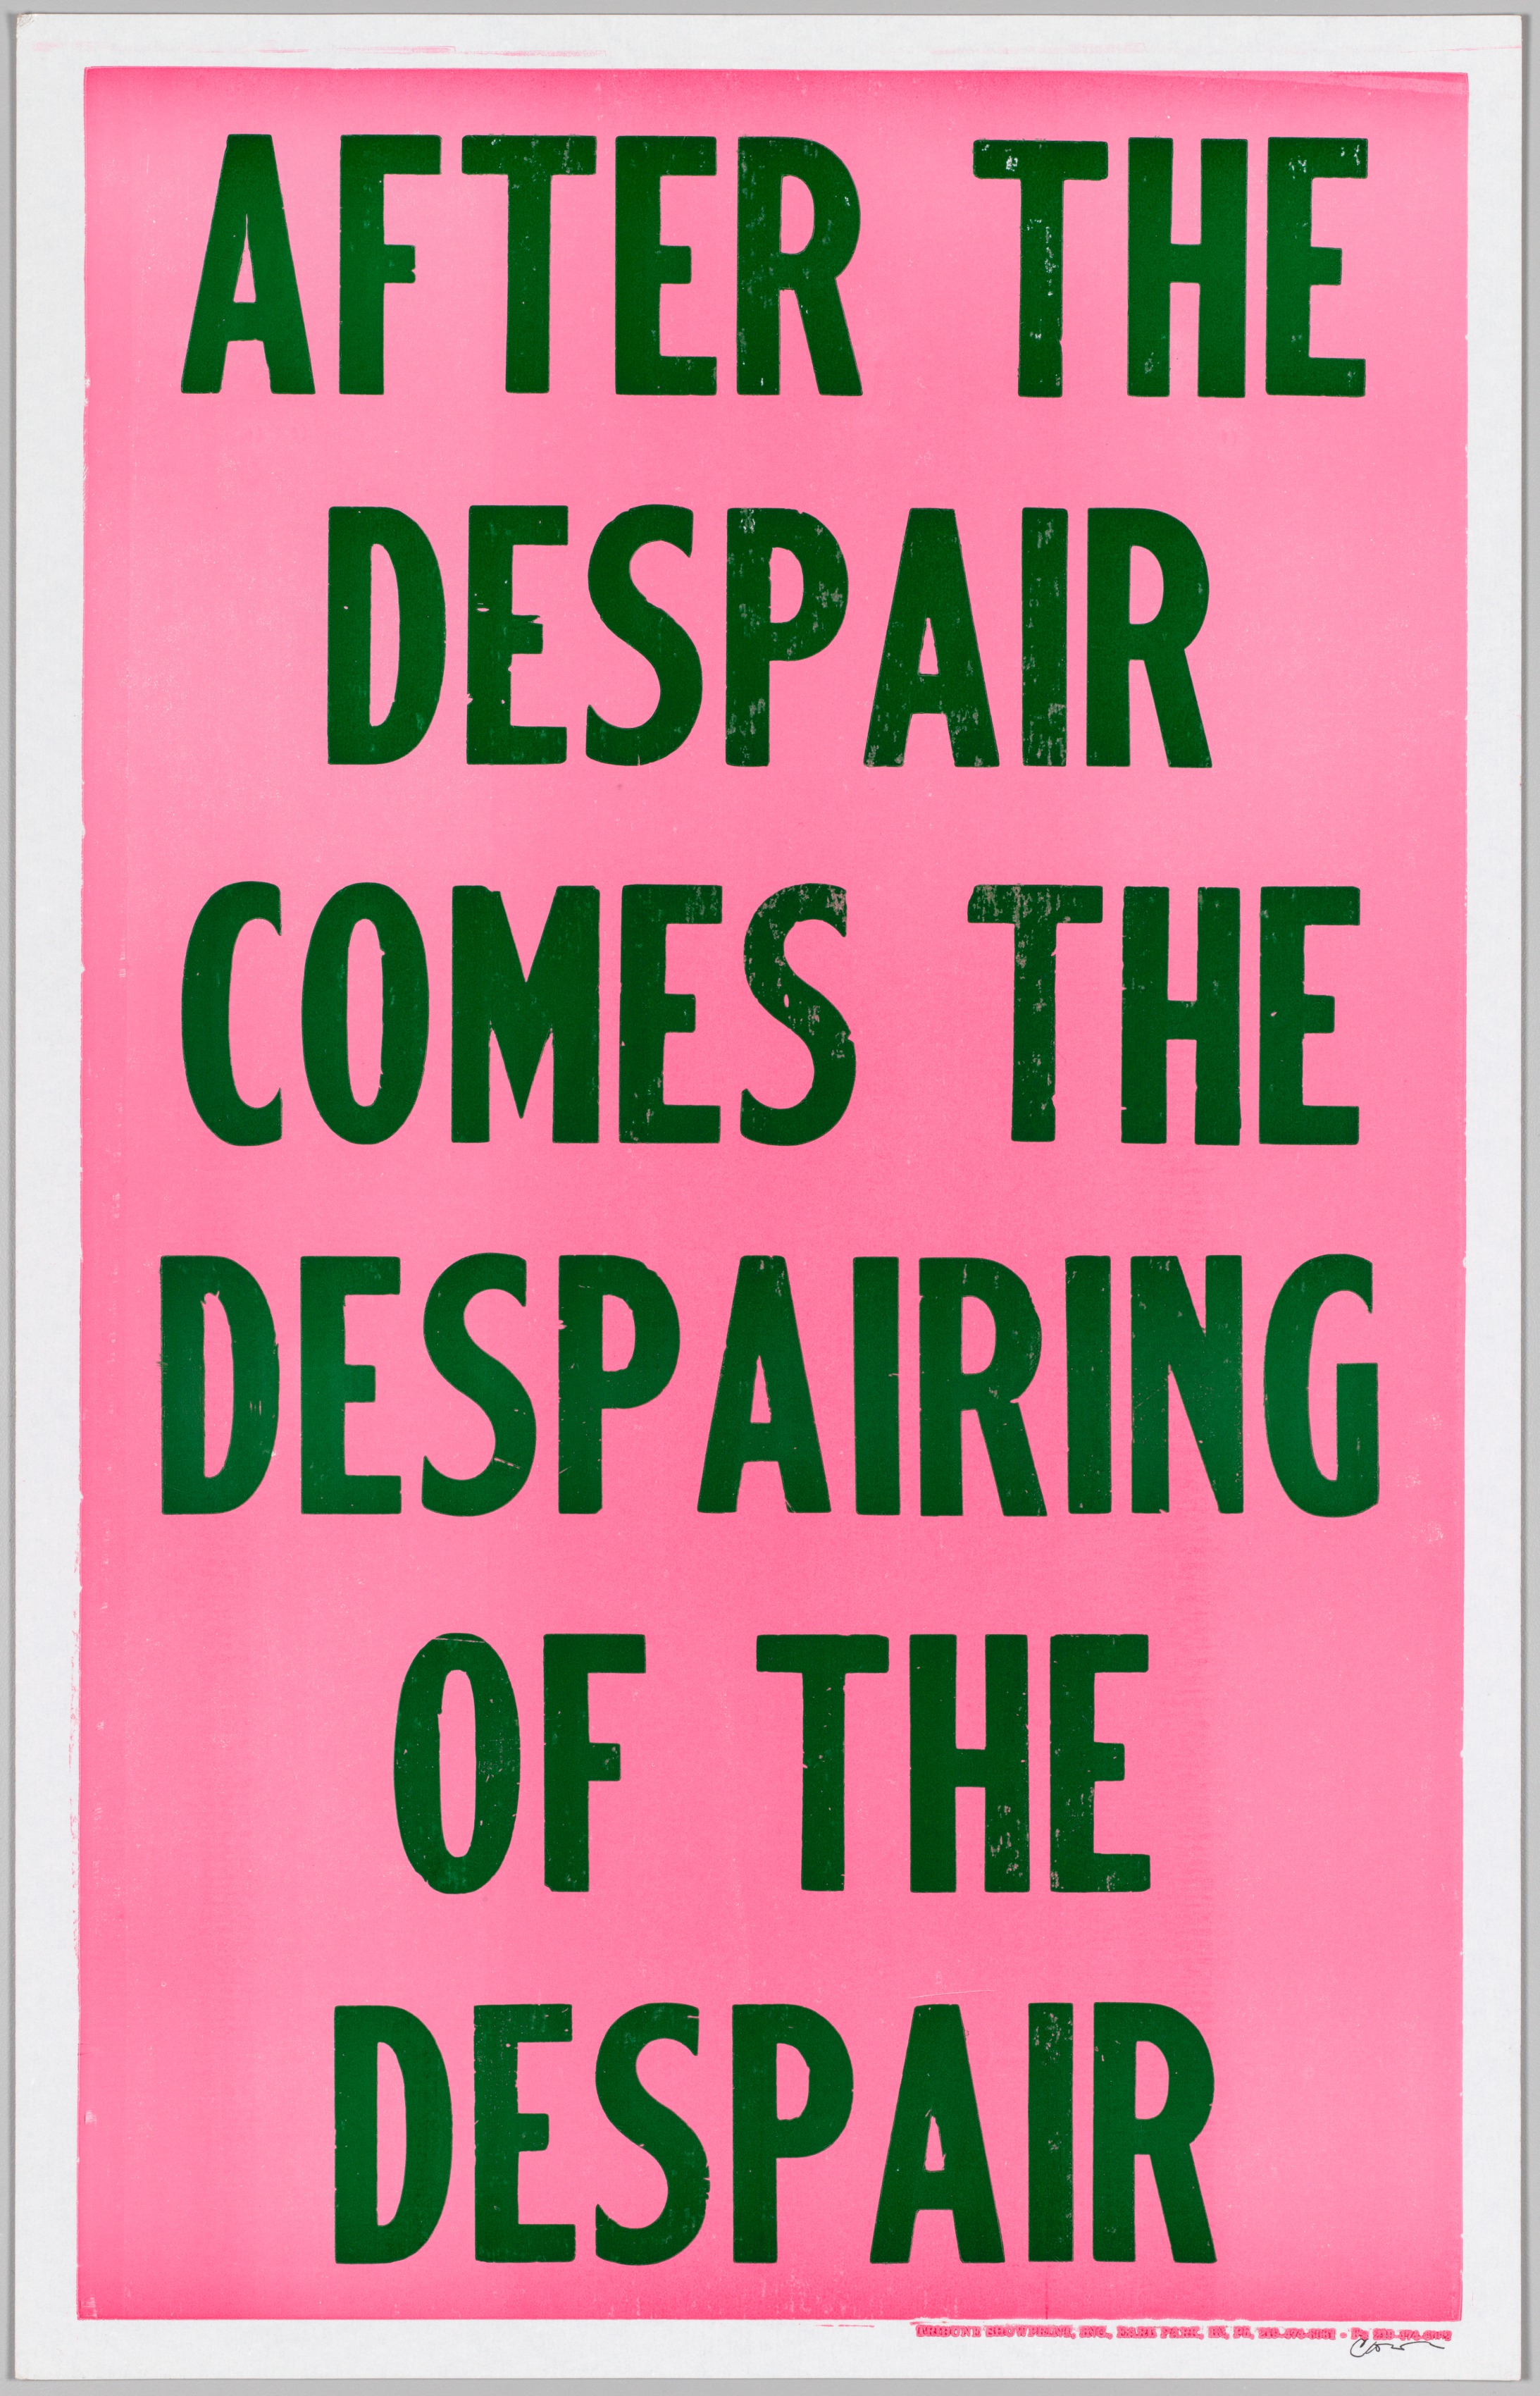 The Bad Air Smelled of Roses: After the Despair Comes the Despairing of the Despair